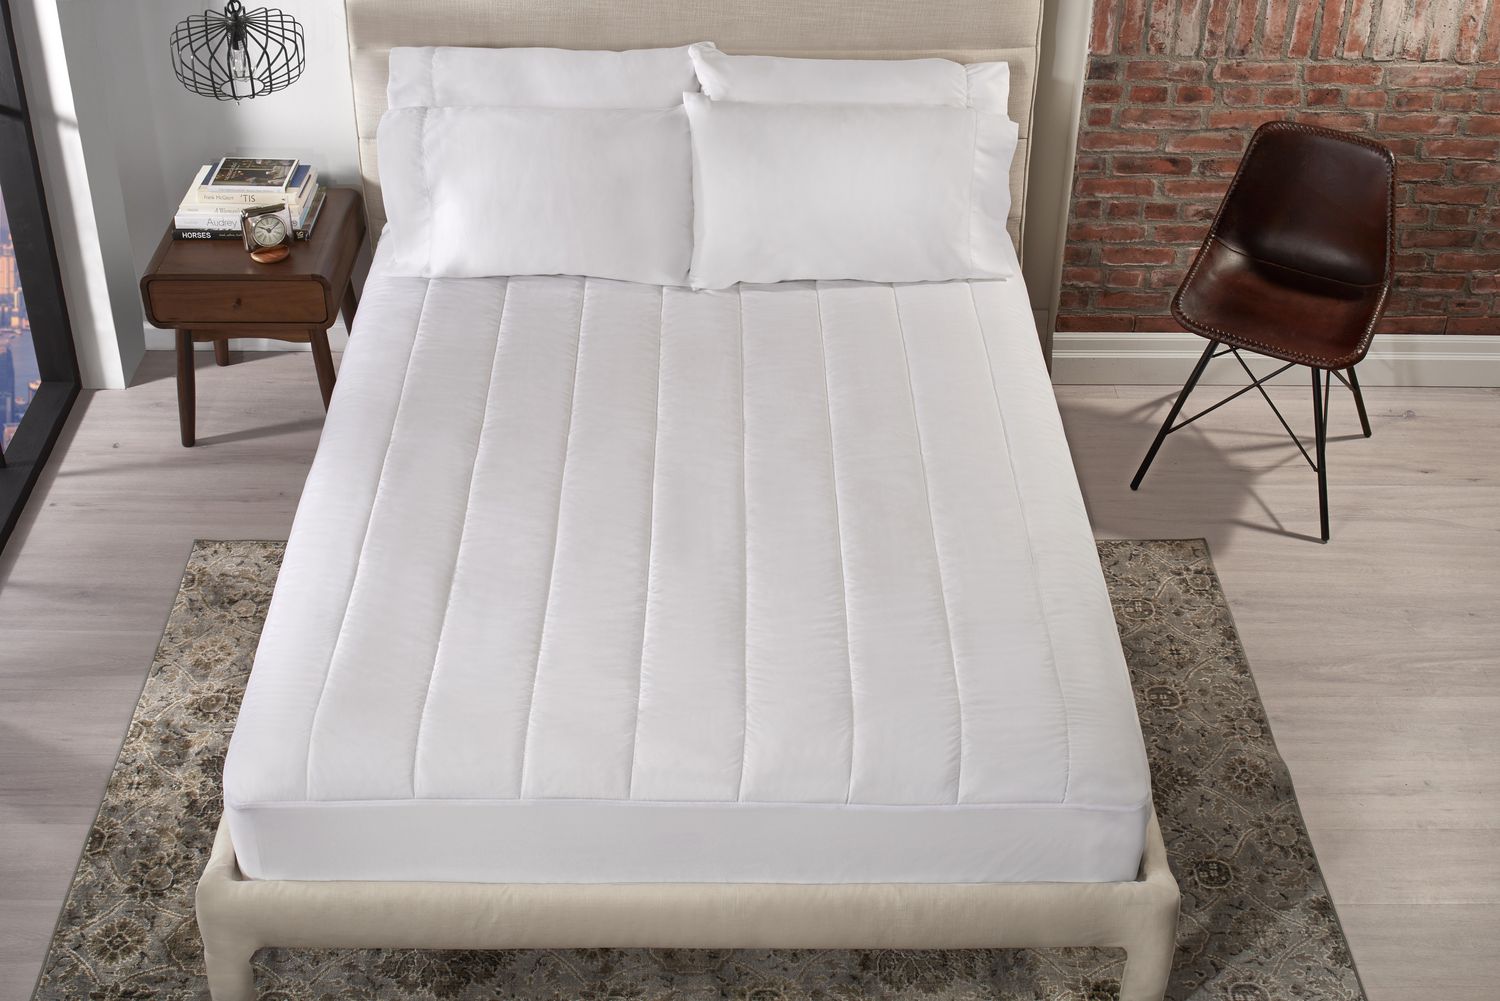 sunbeam twin extra long quilted heated mattress pad